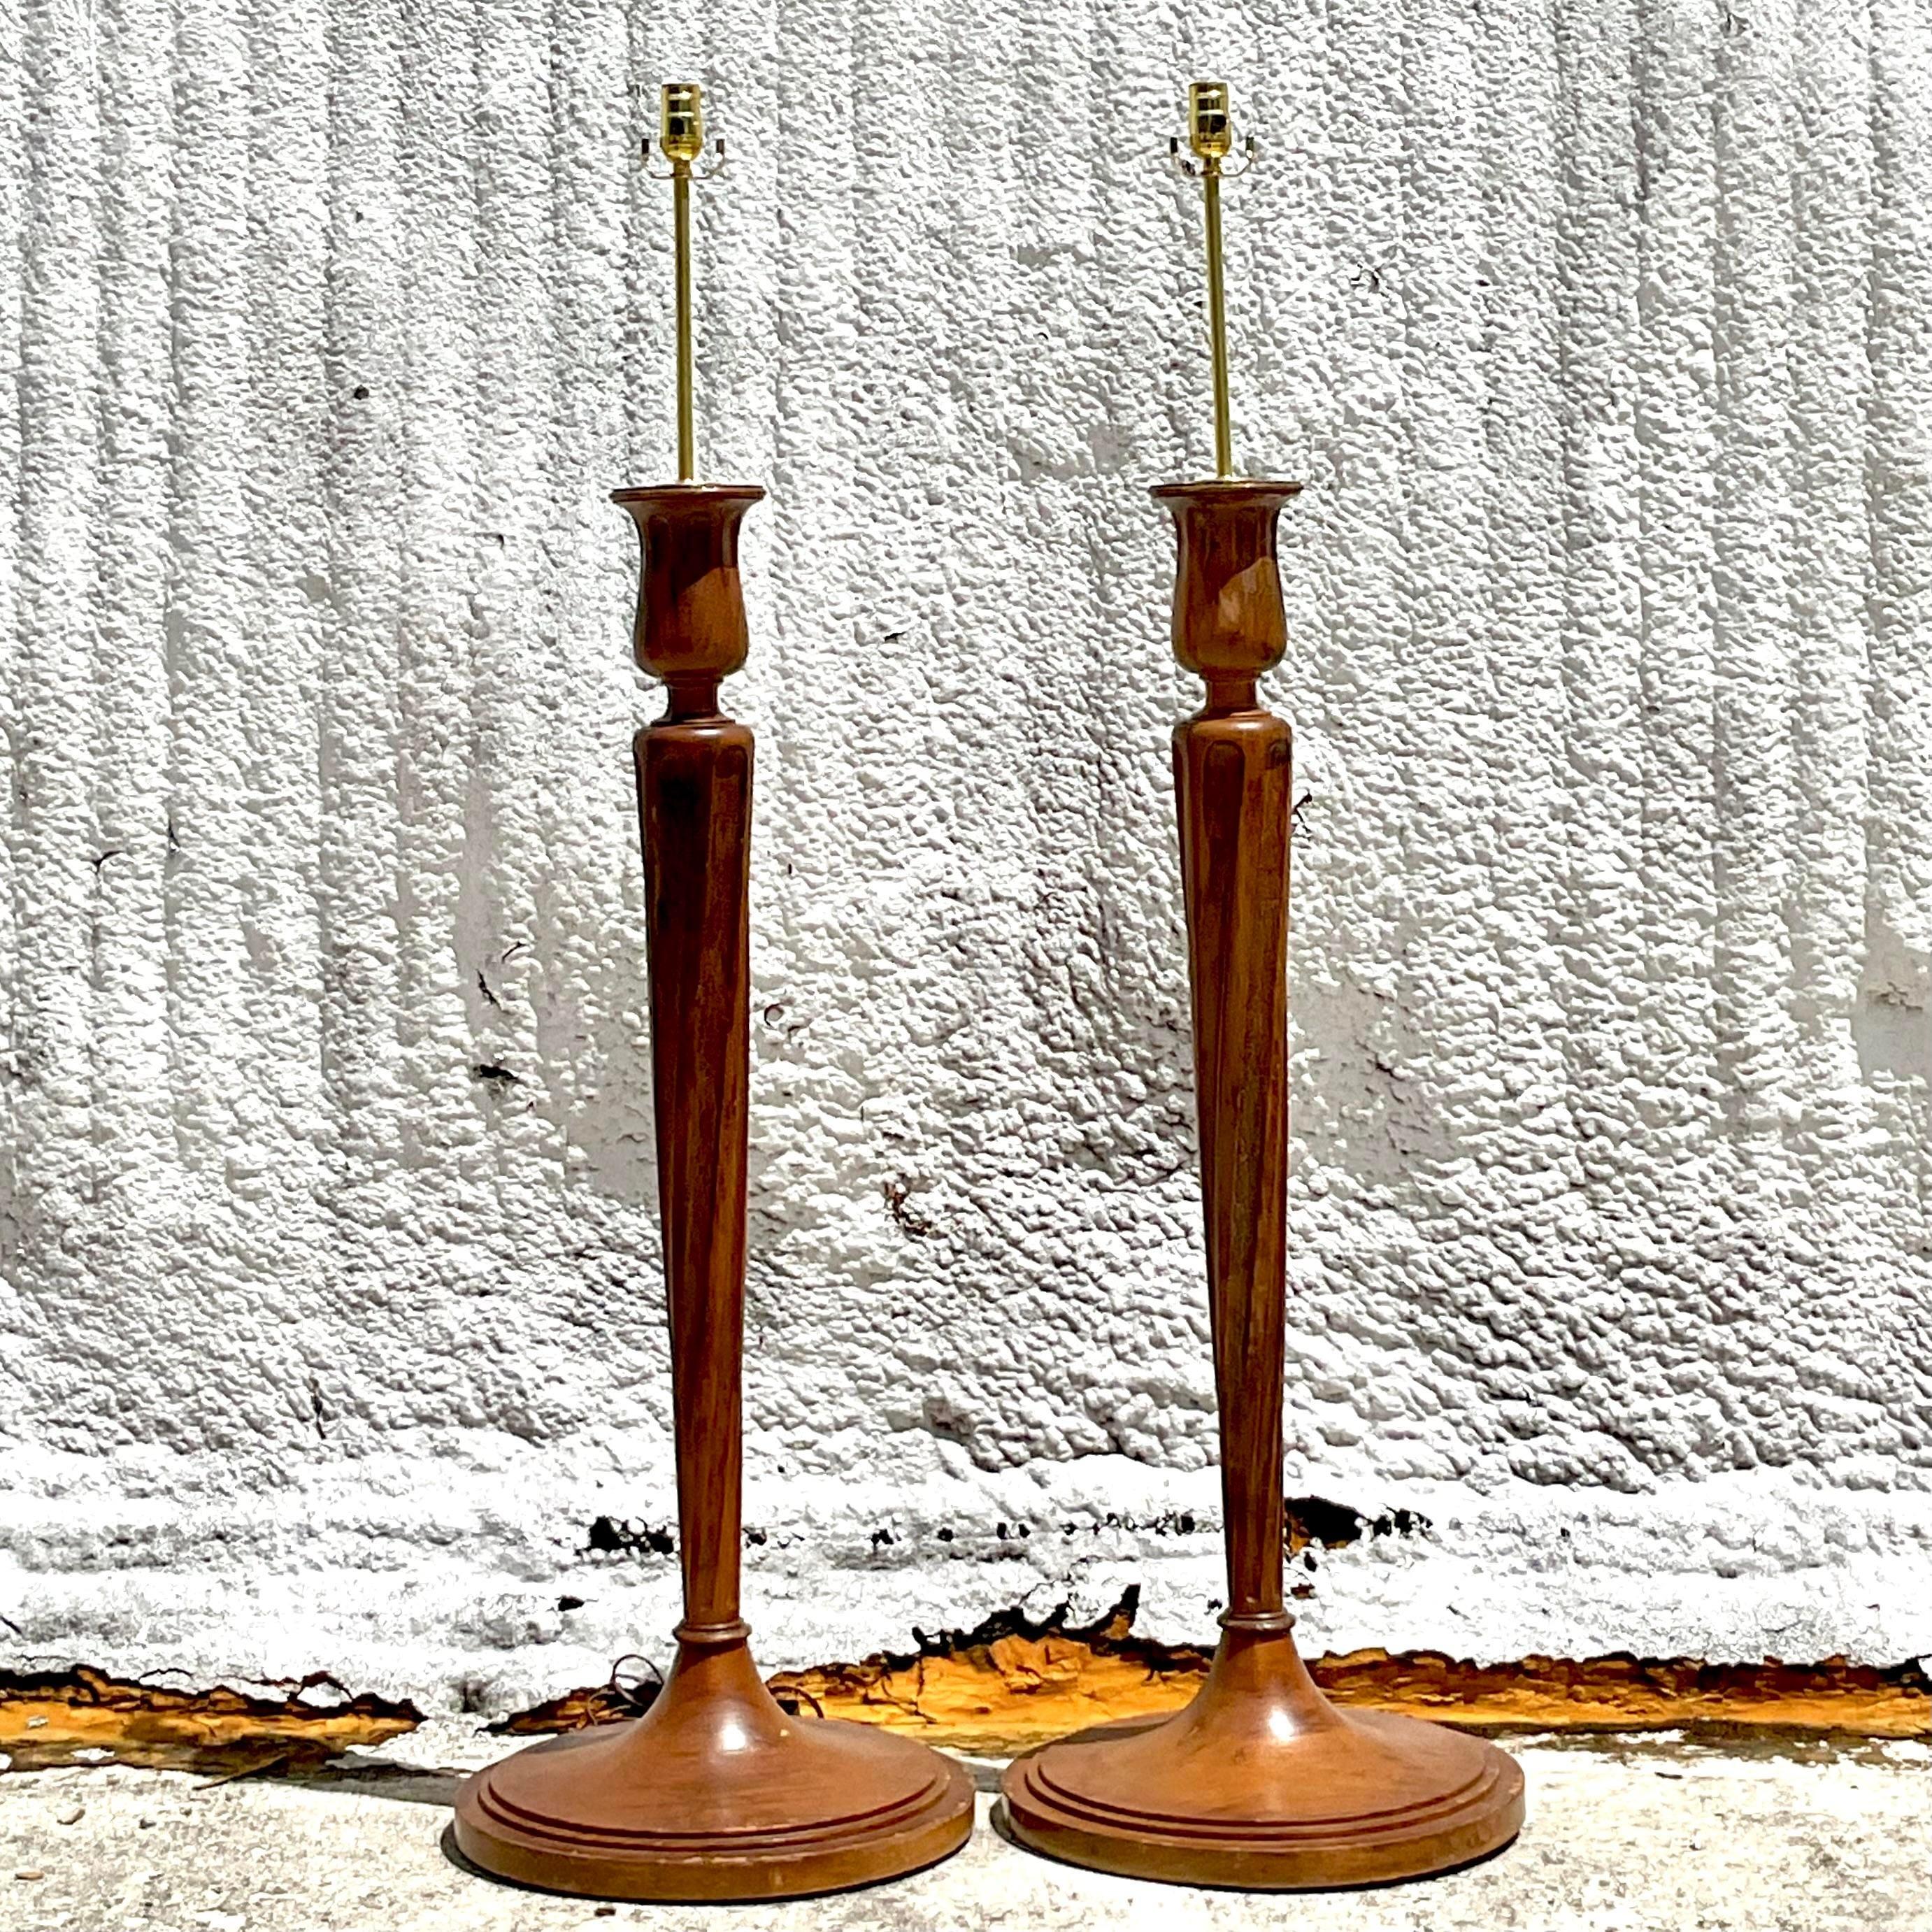 Vintage Regency Boho Candlestick Wood Floor Lamps - a Pair In Good Condition For Sale In west palm beach, FL